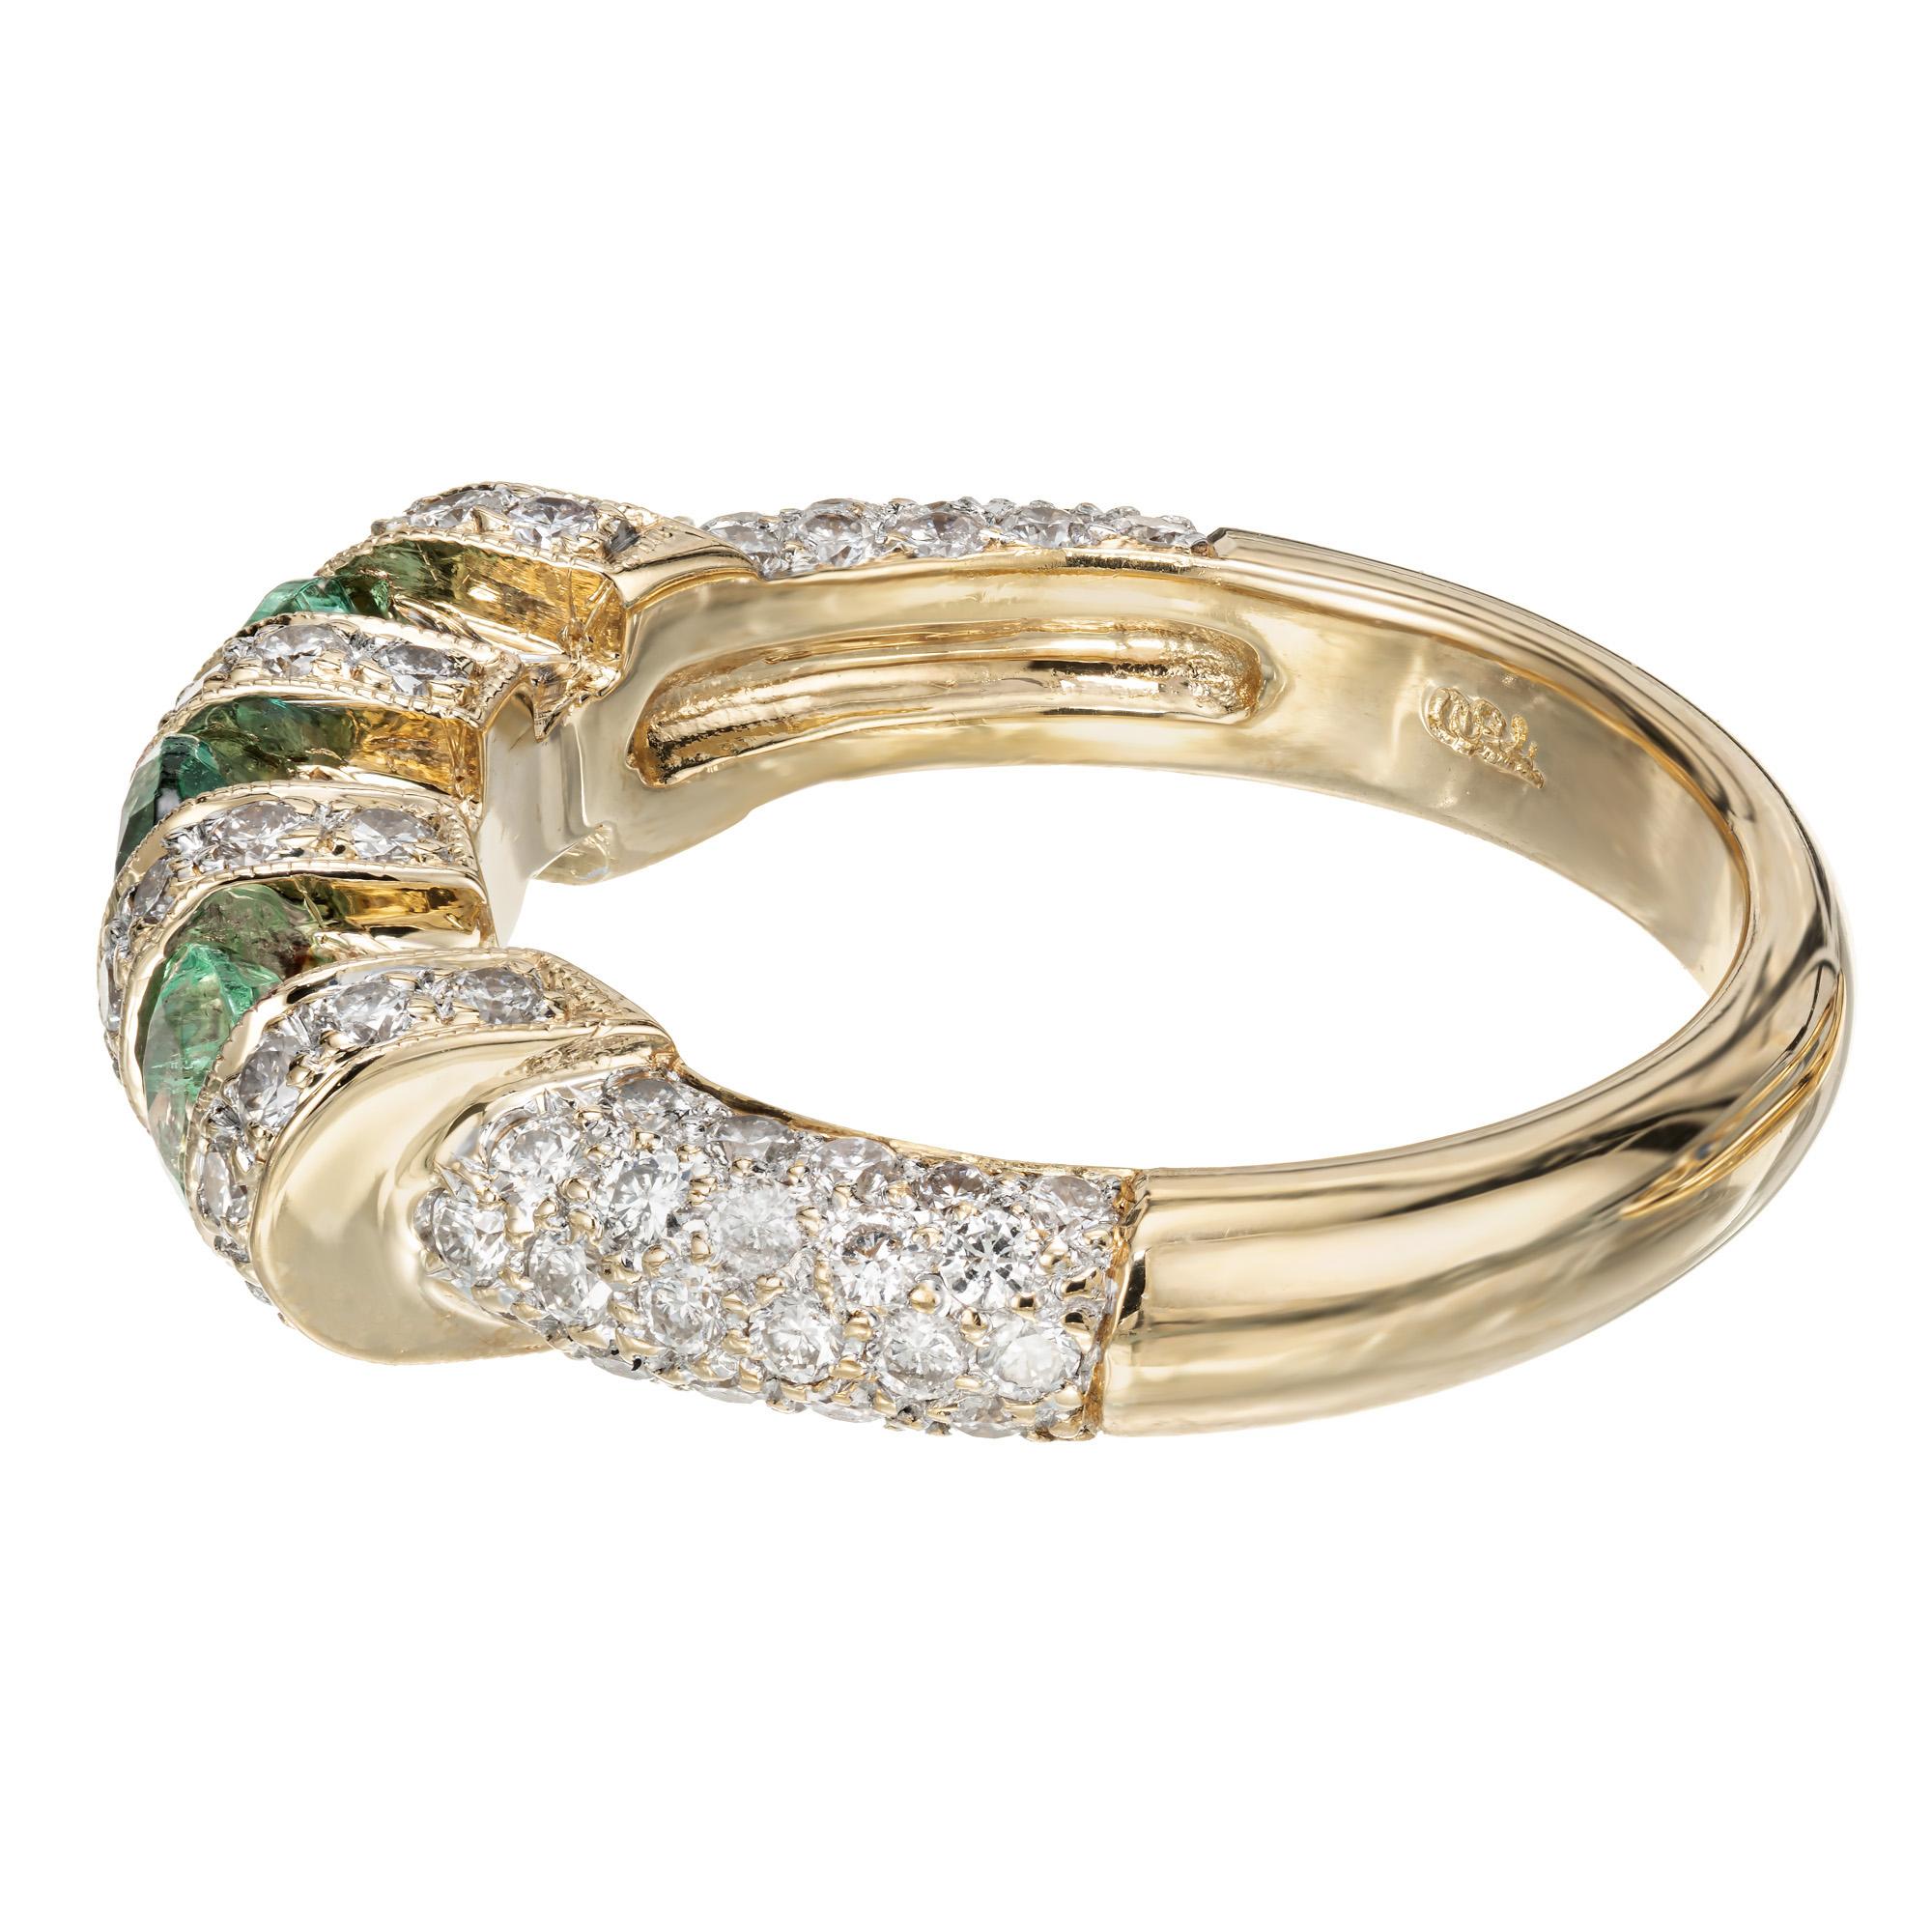 .78 Carat Emerald Pavé Diamond Gold Wedding Band Ring In Good Condition For Sale In Stamford, CT